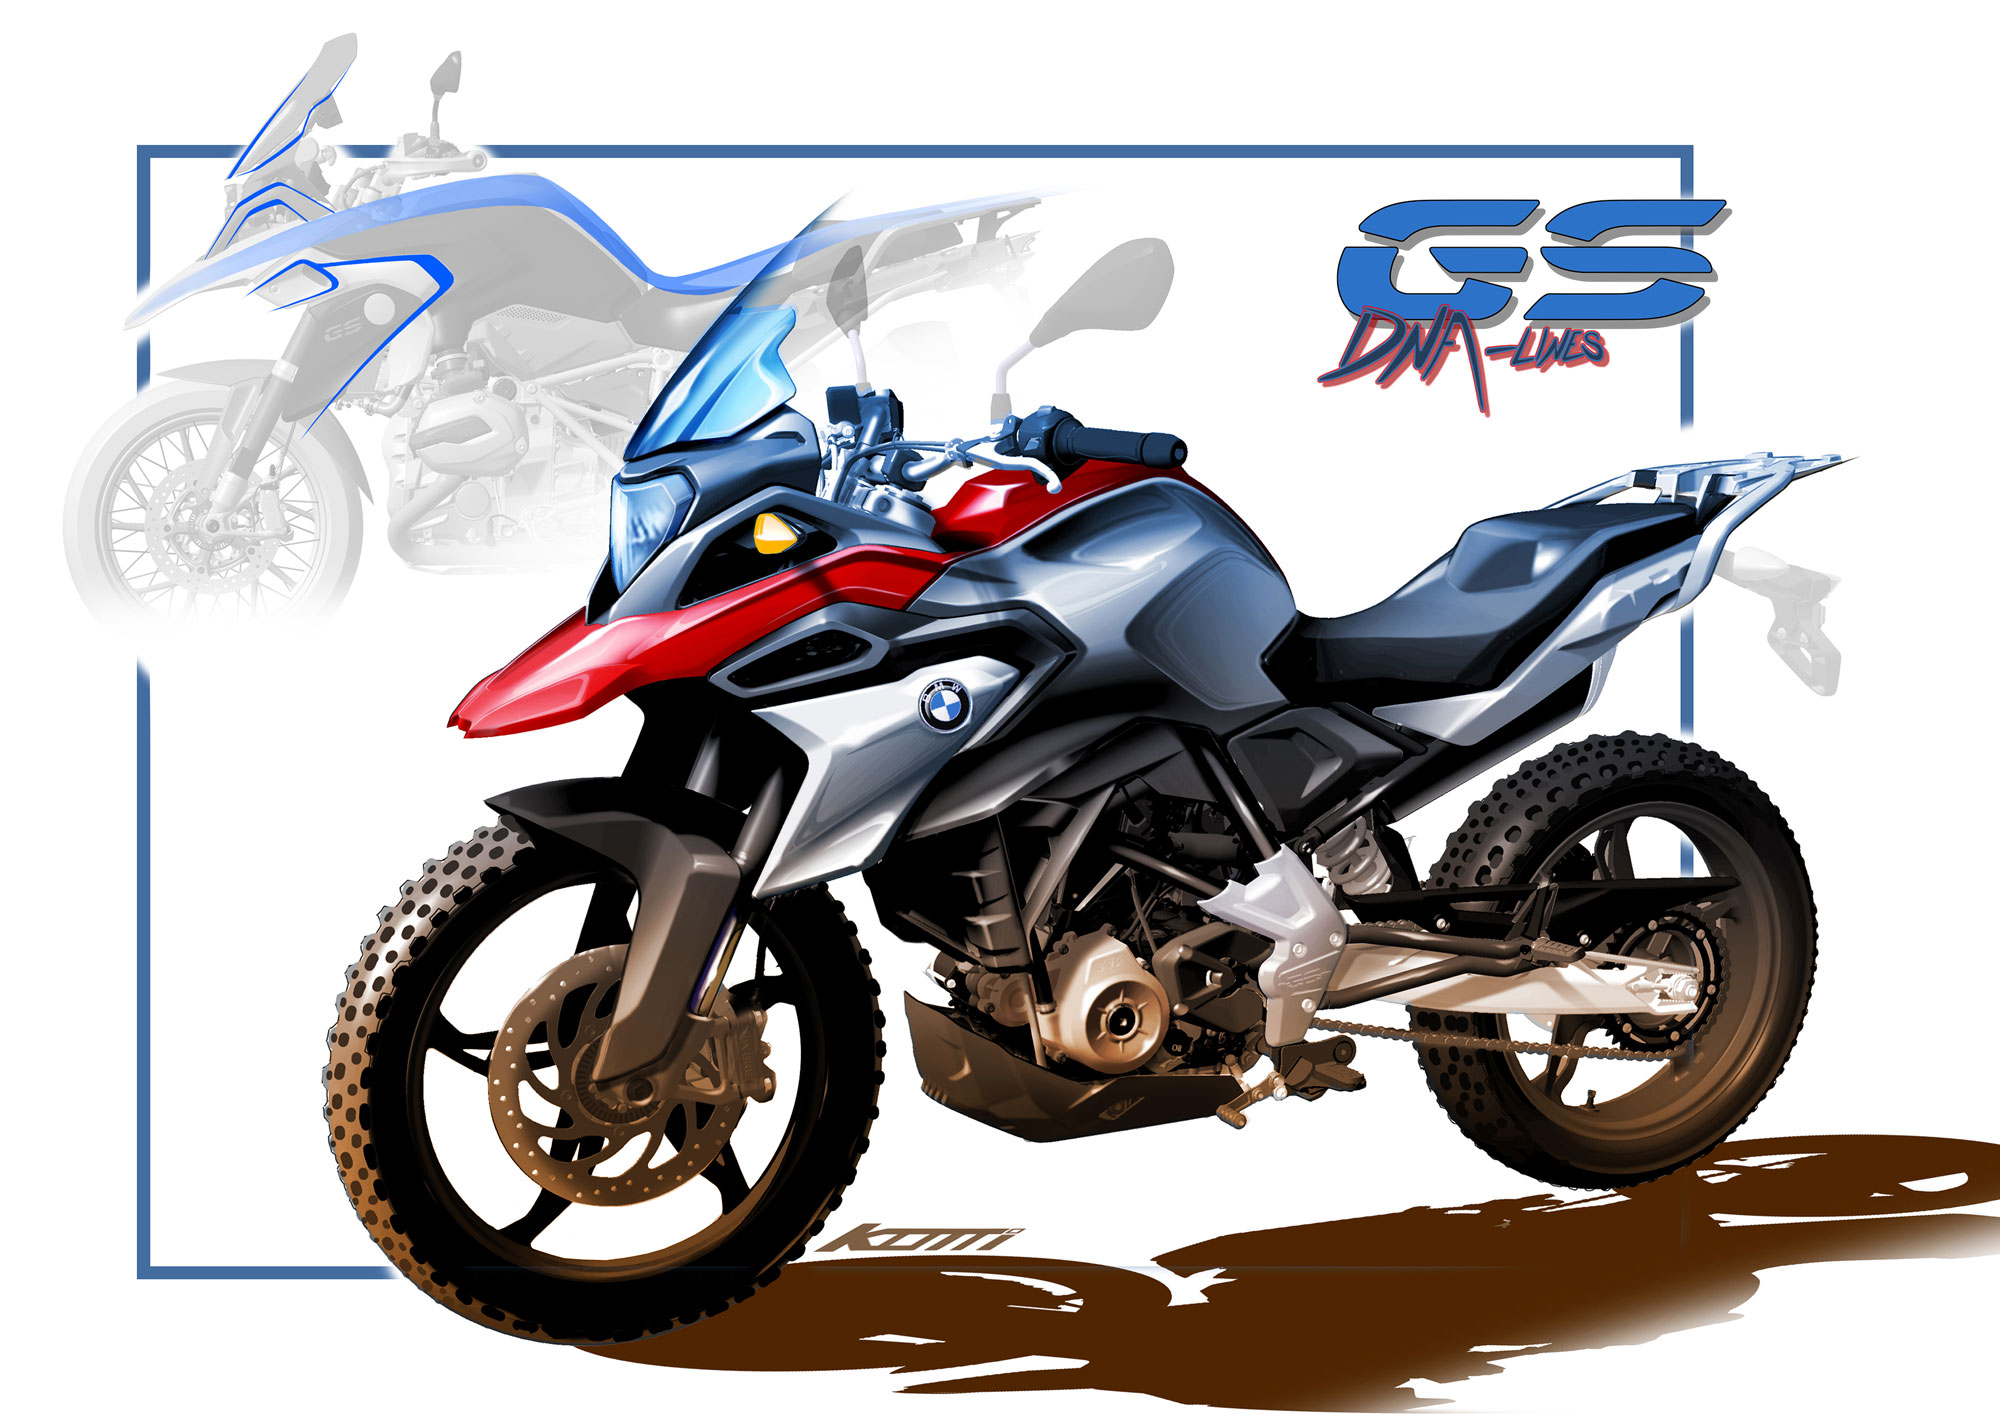 Rendering of the BMW 310 GS